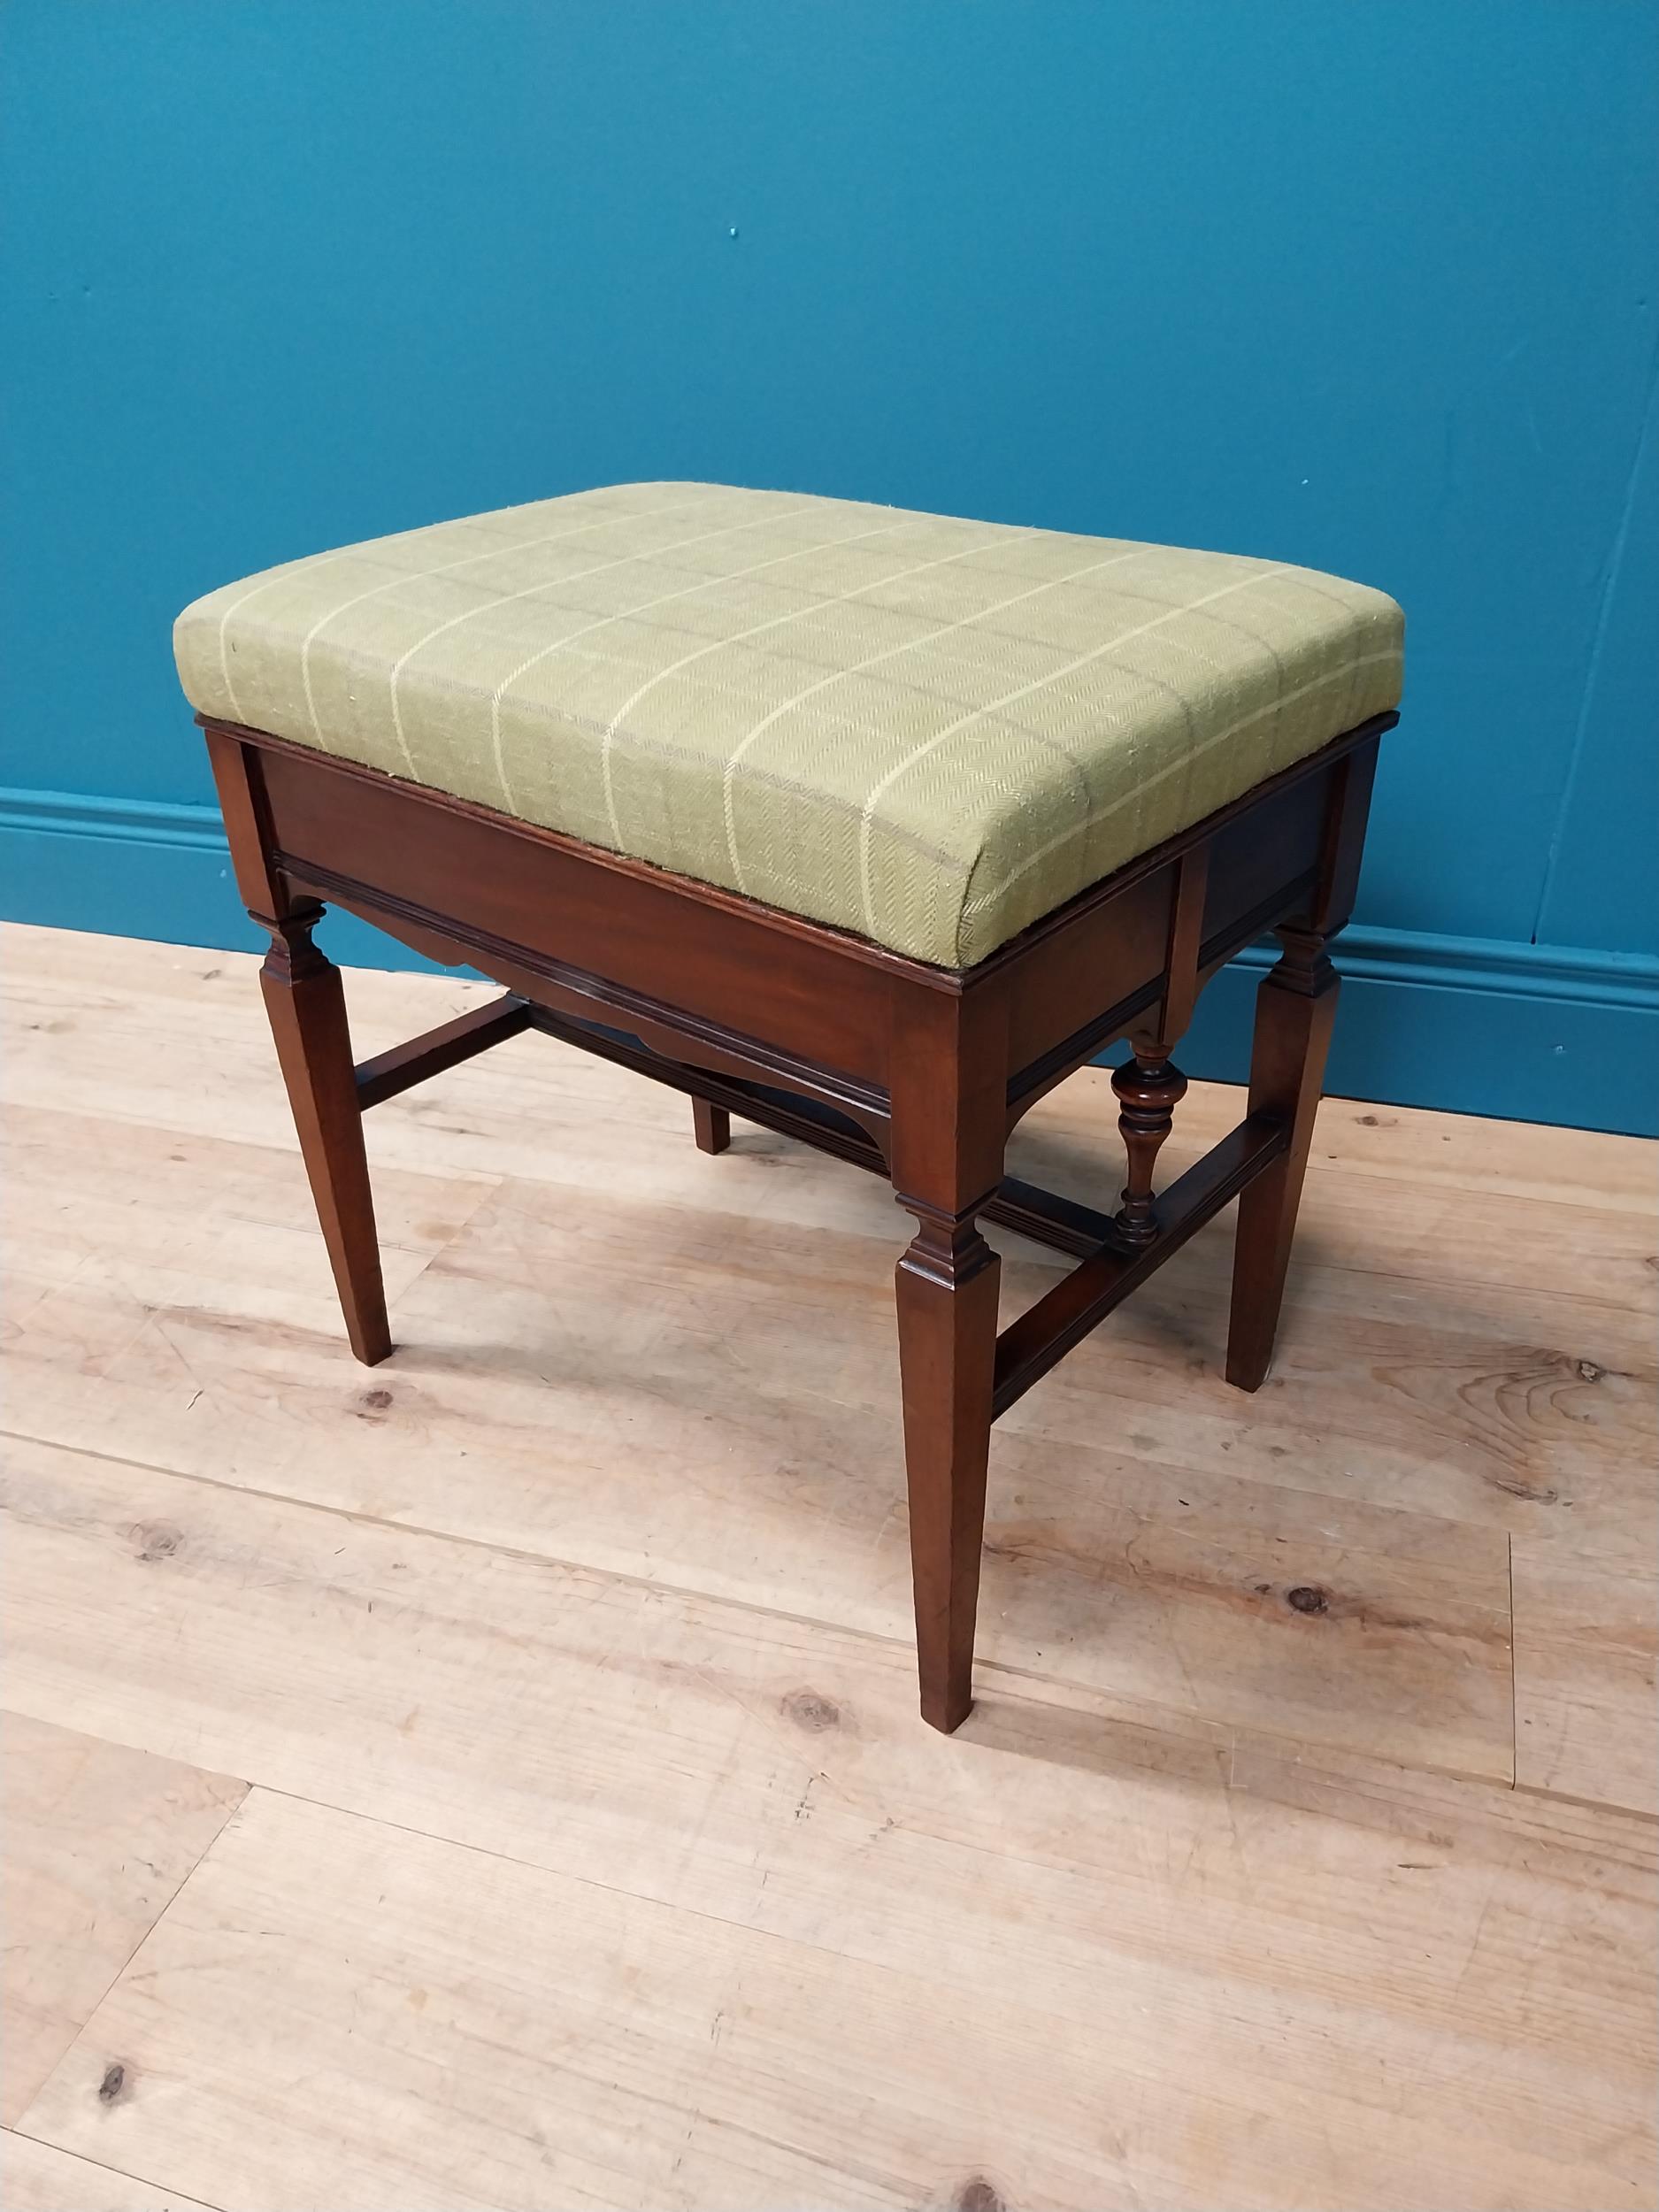 Good quality Edwardian mahogany piano stool with upholstered seat and lift up seat raised on